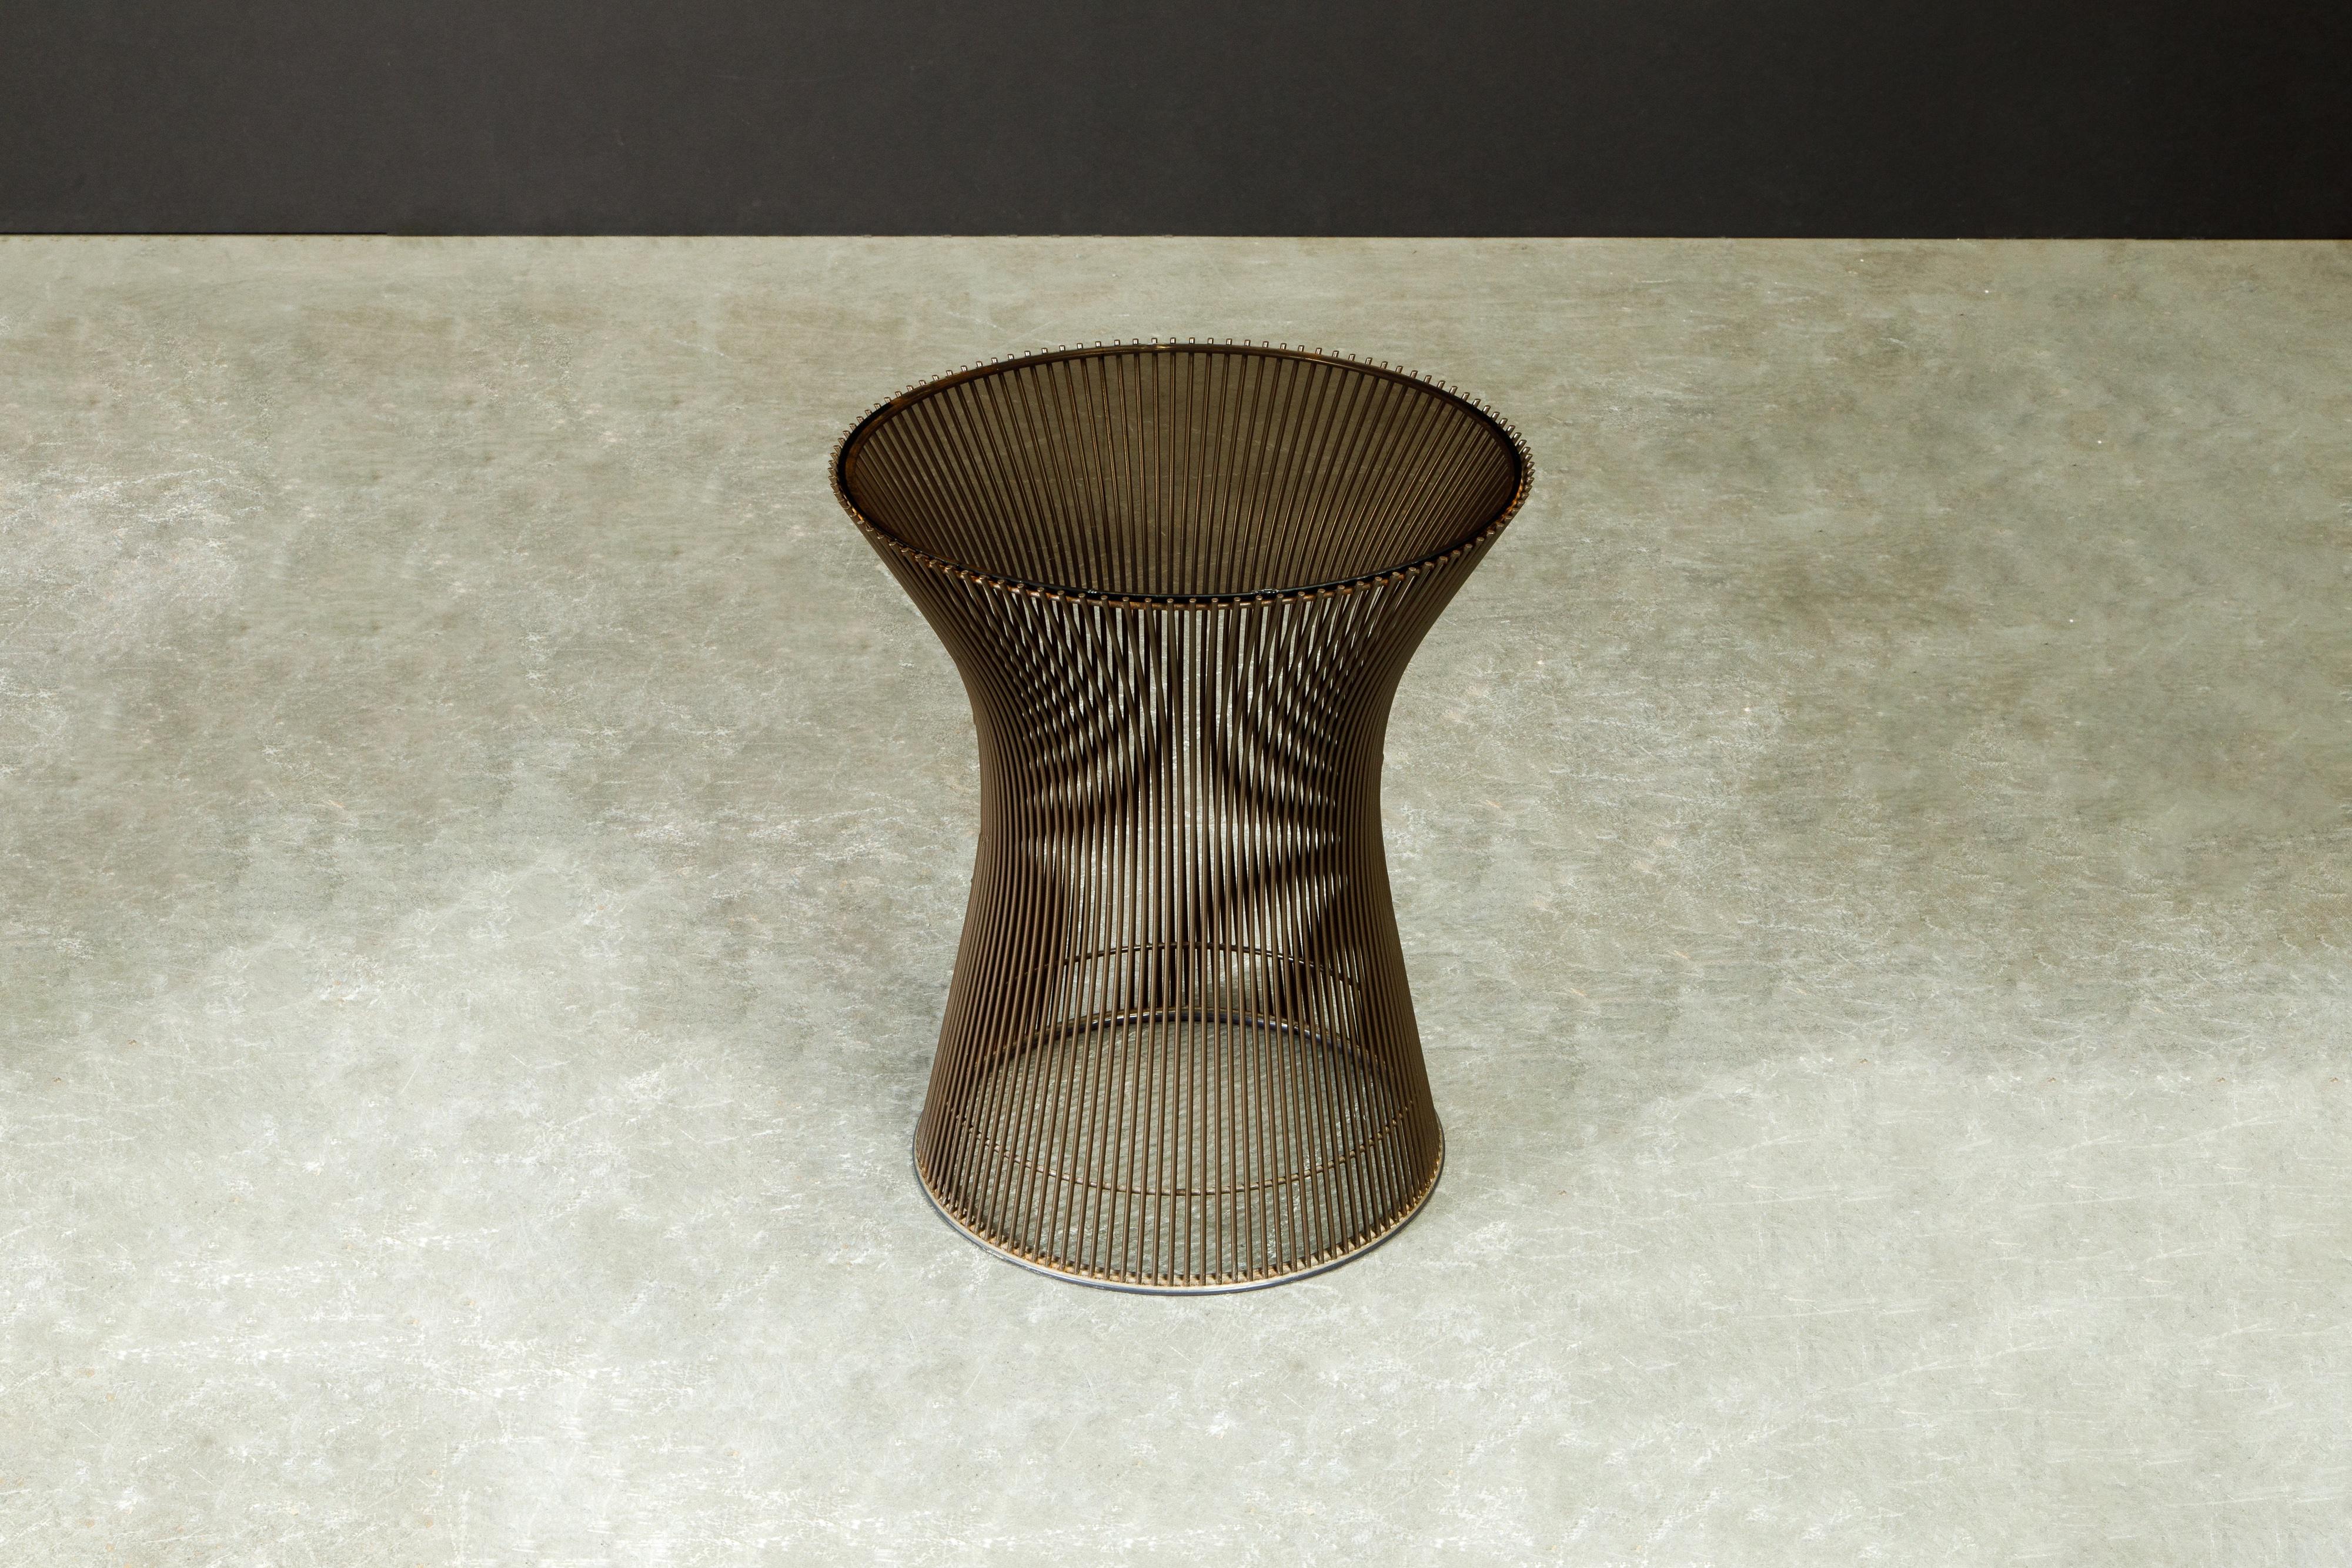 A beautiful original production bronze side table by Warren Platner for Knoll International, designed in 1966 and this example produced during the original production years of this design, circa 1968 to mid 70s. This example is in great vintage